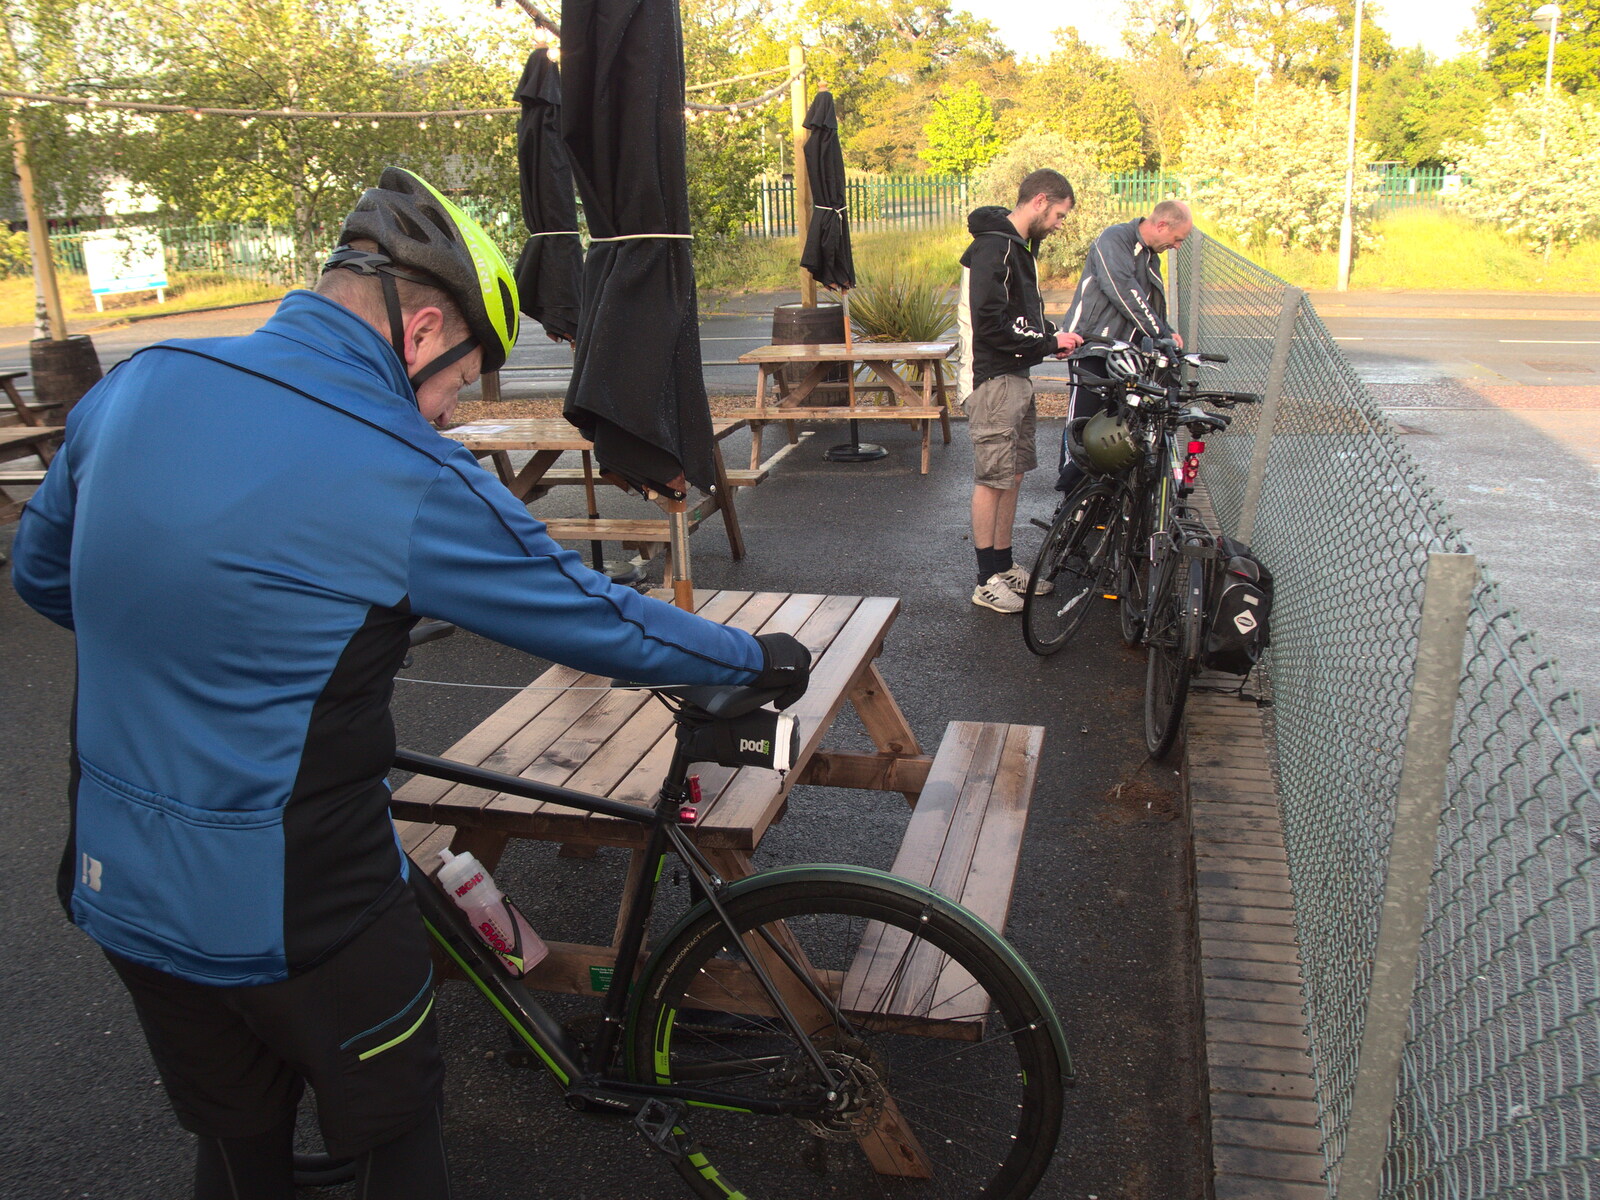 We lock the bikes up on Sawmills Road from The BSCC at the Ampersand Tap, Sawmills Road, Diss, Norfolk - 20th May 2021